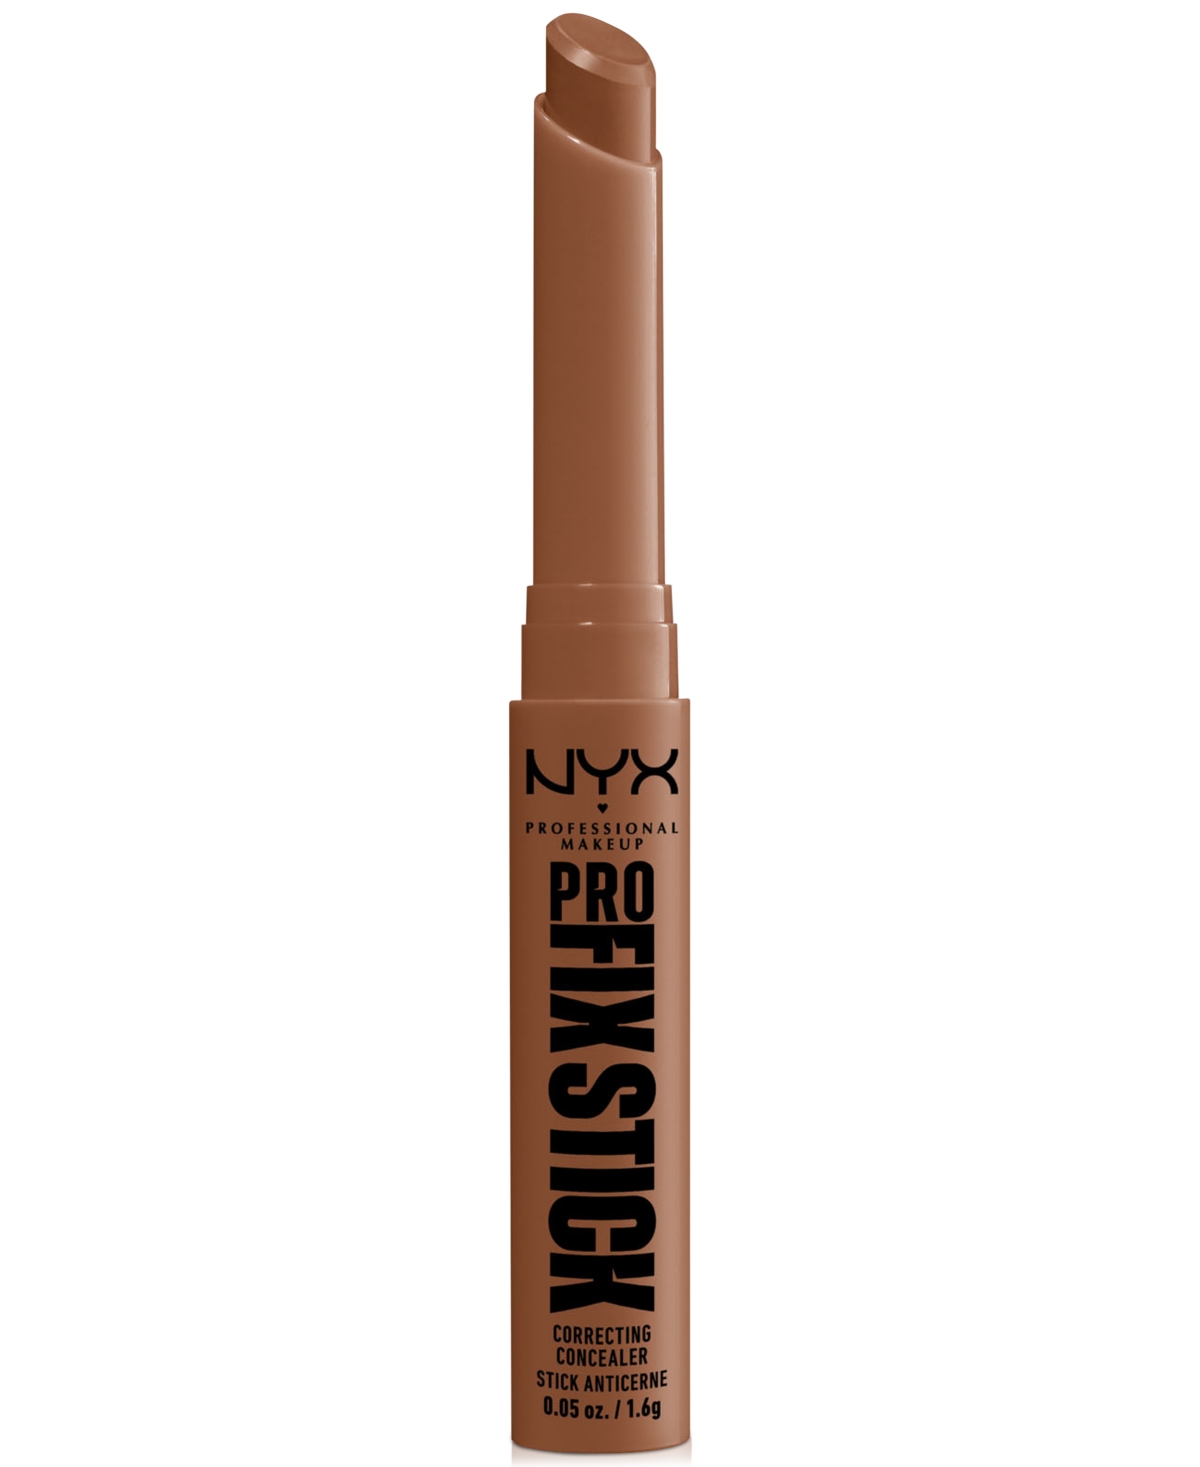 Nyx Professional Makeup Pro Fix Stick Correcting Concealer, 0.05 Oz. In Sienna